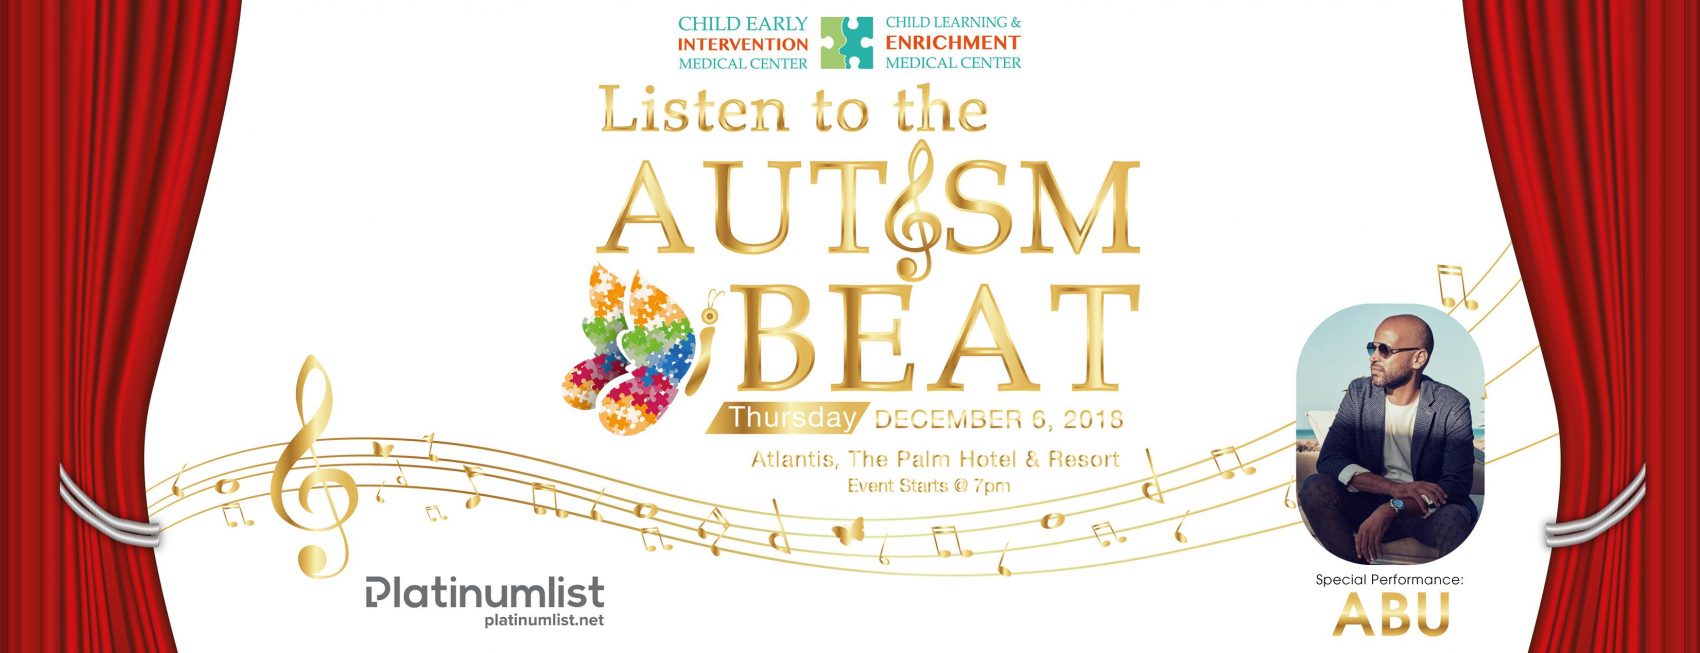 Listen to the Autism Beat - Coming Soon in UAE